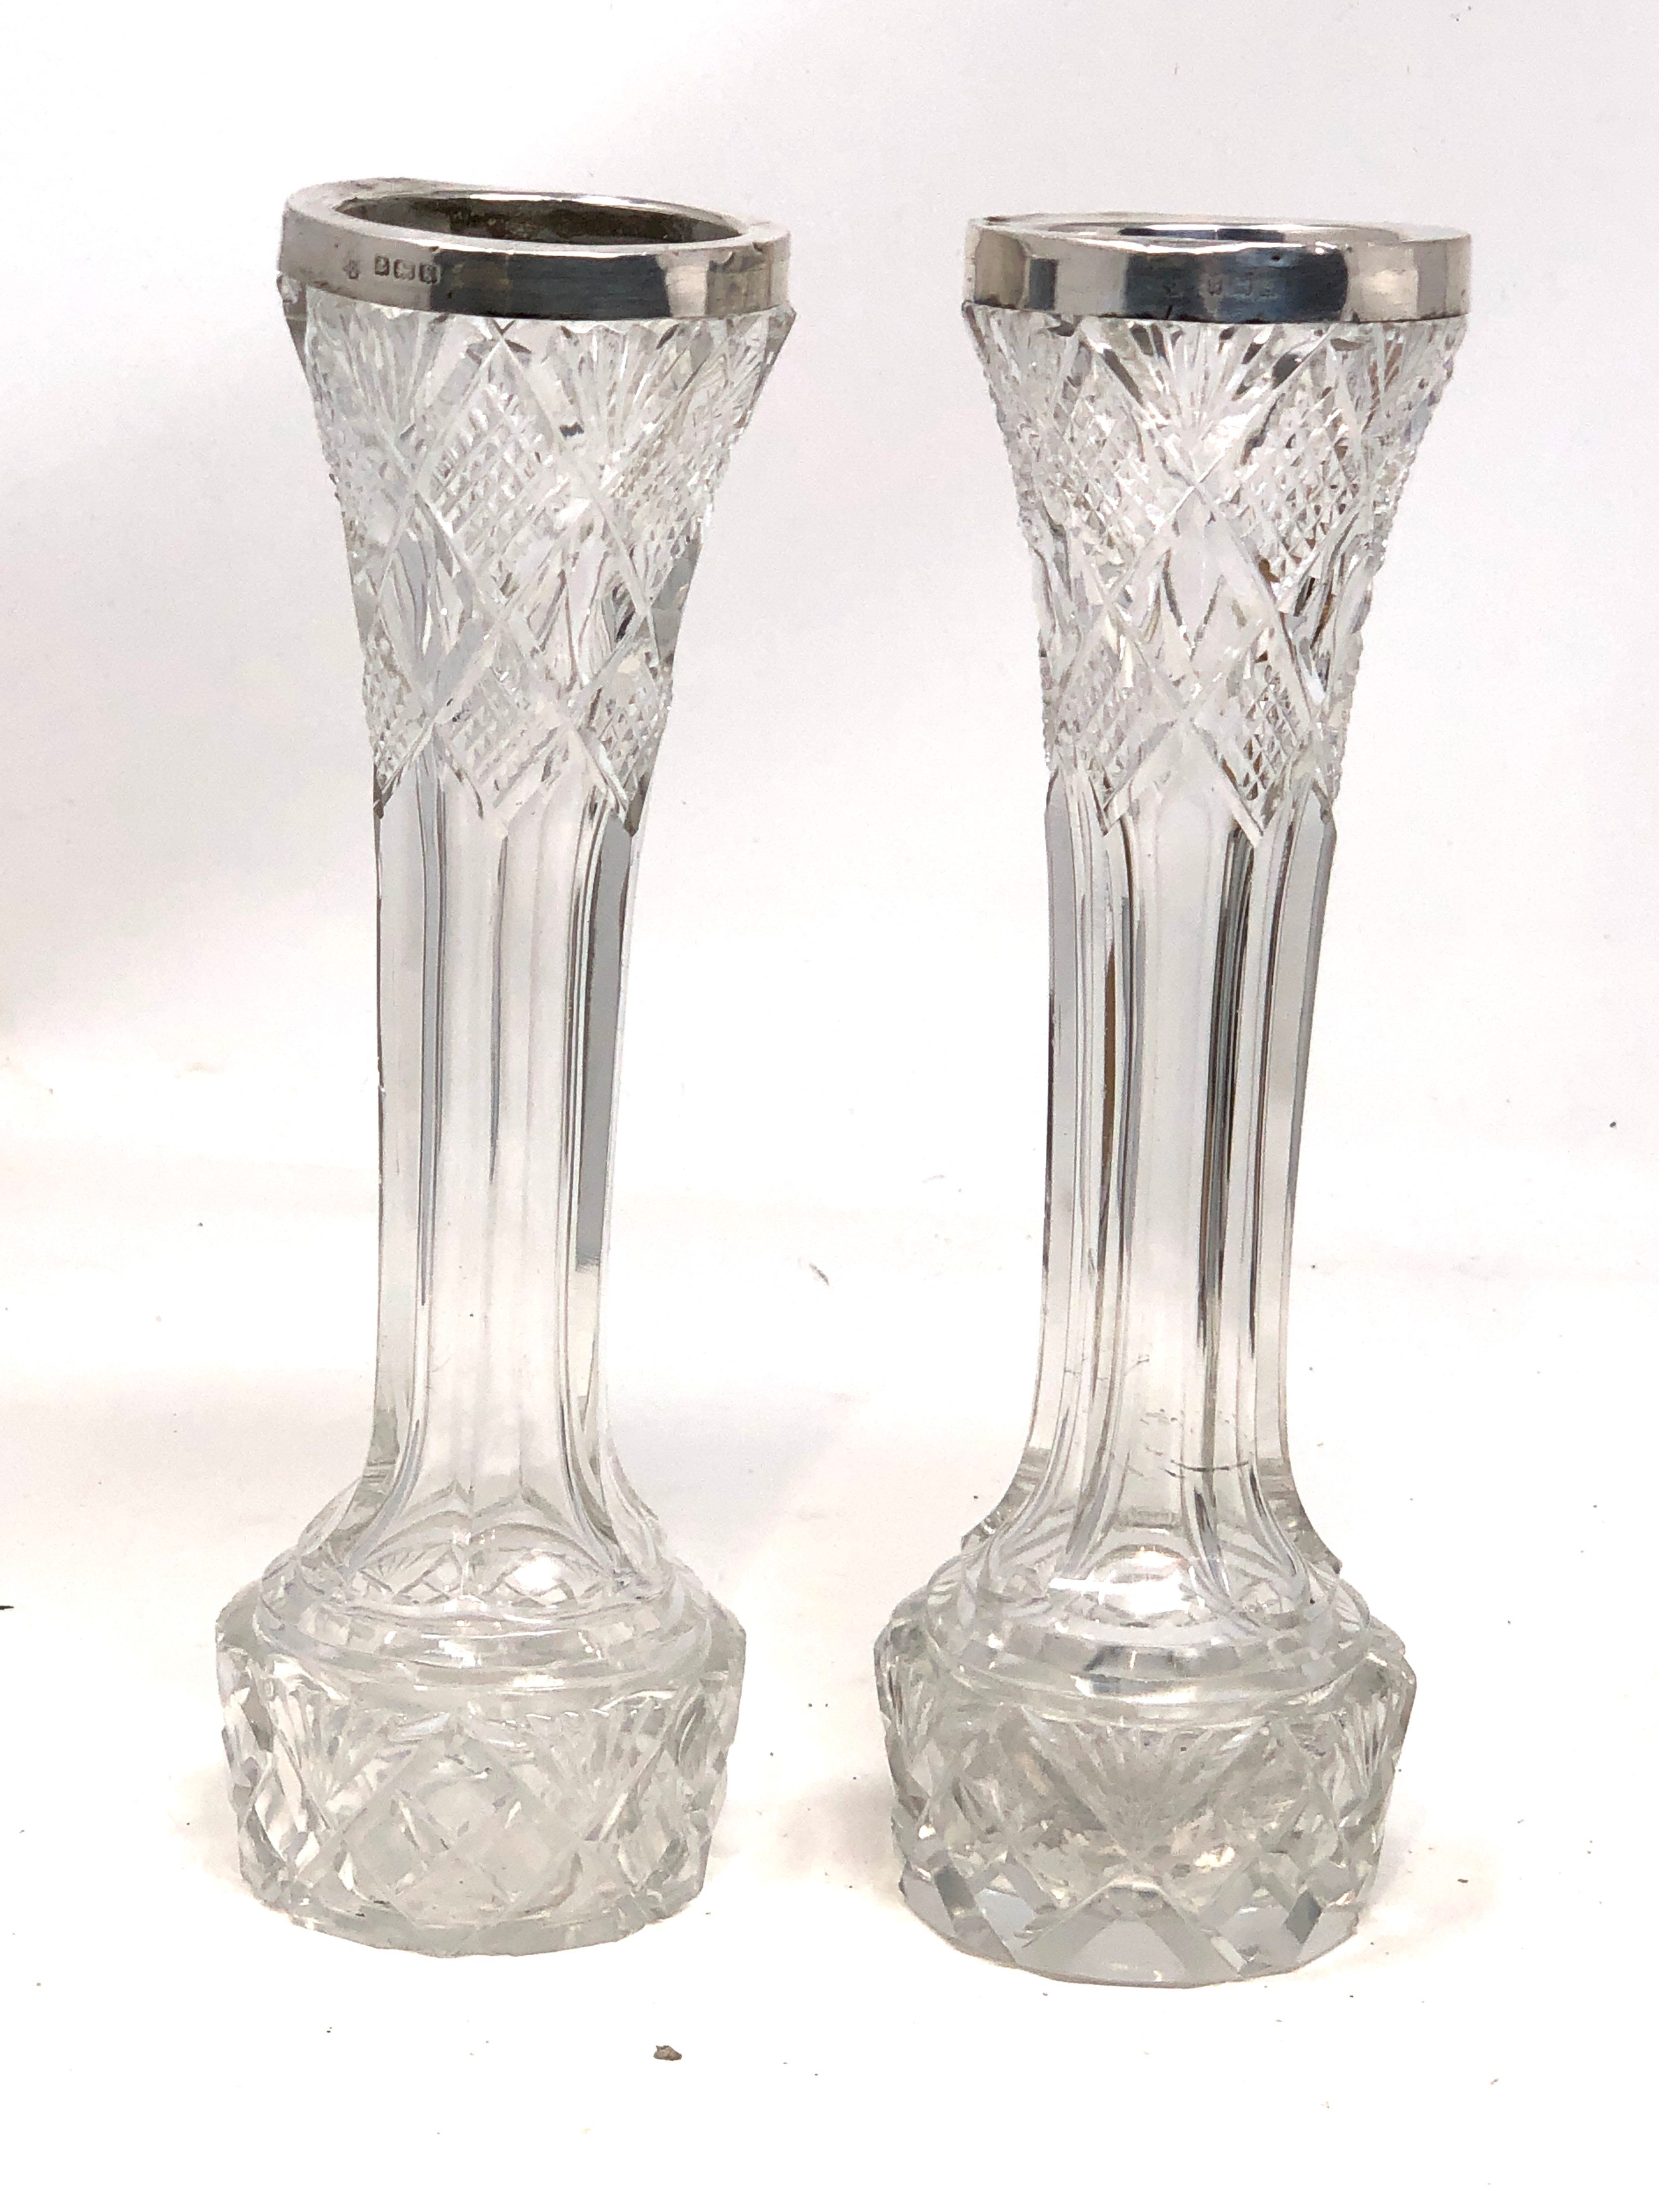 2 antique silver rim cut glass flower vases height 17cm - Image 2 of 4